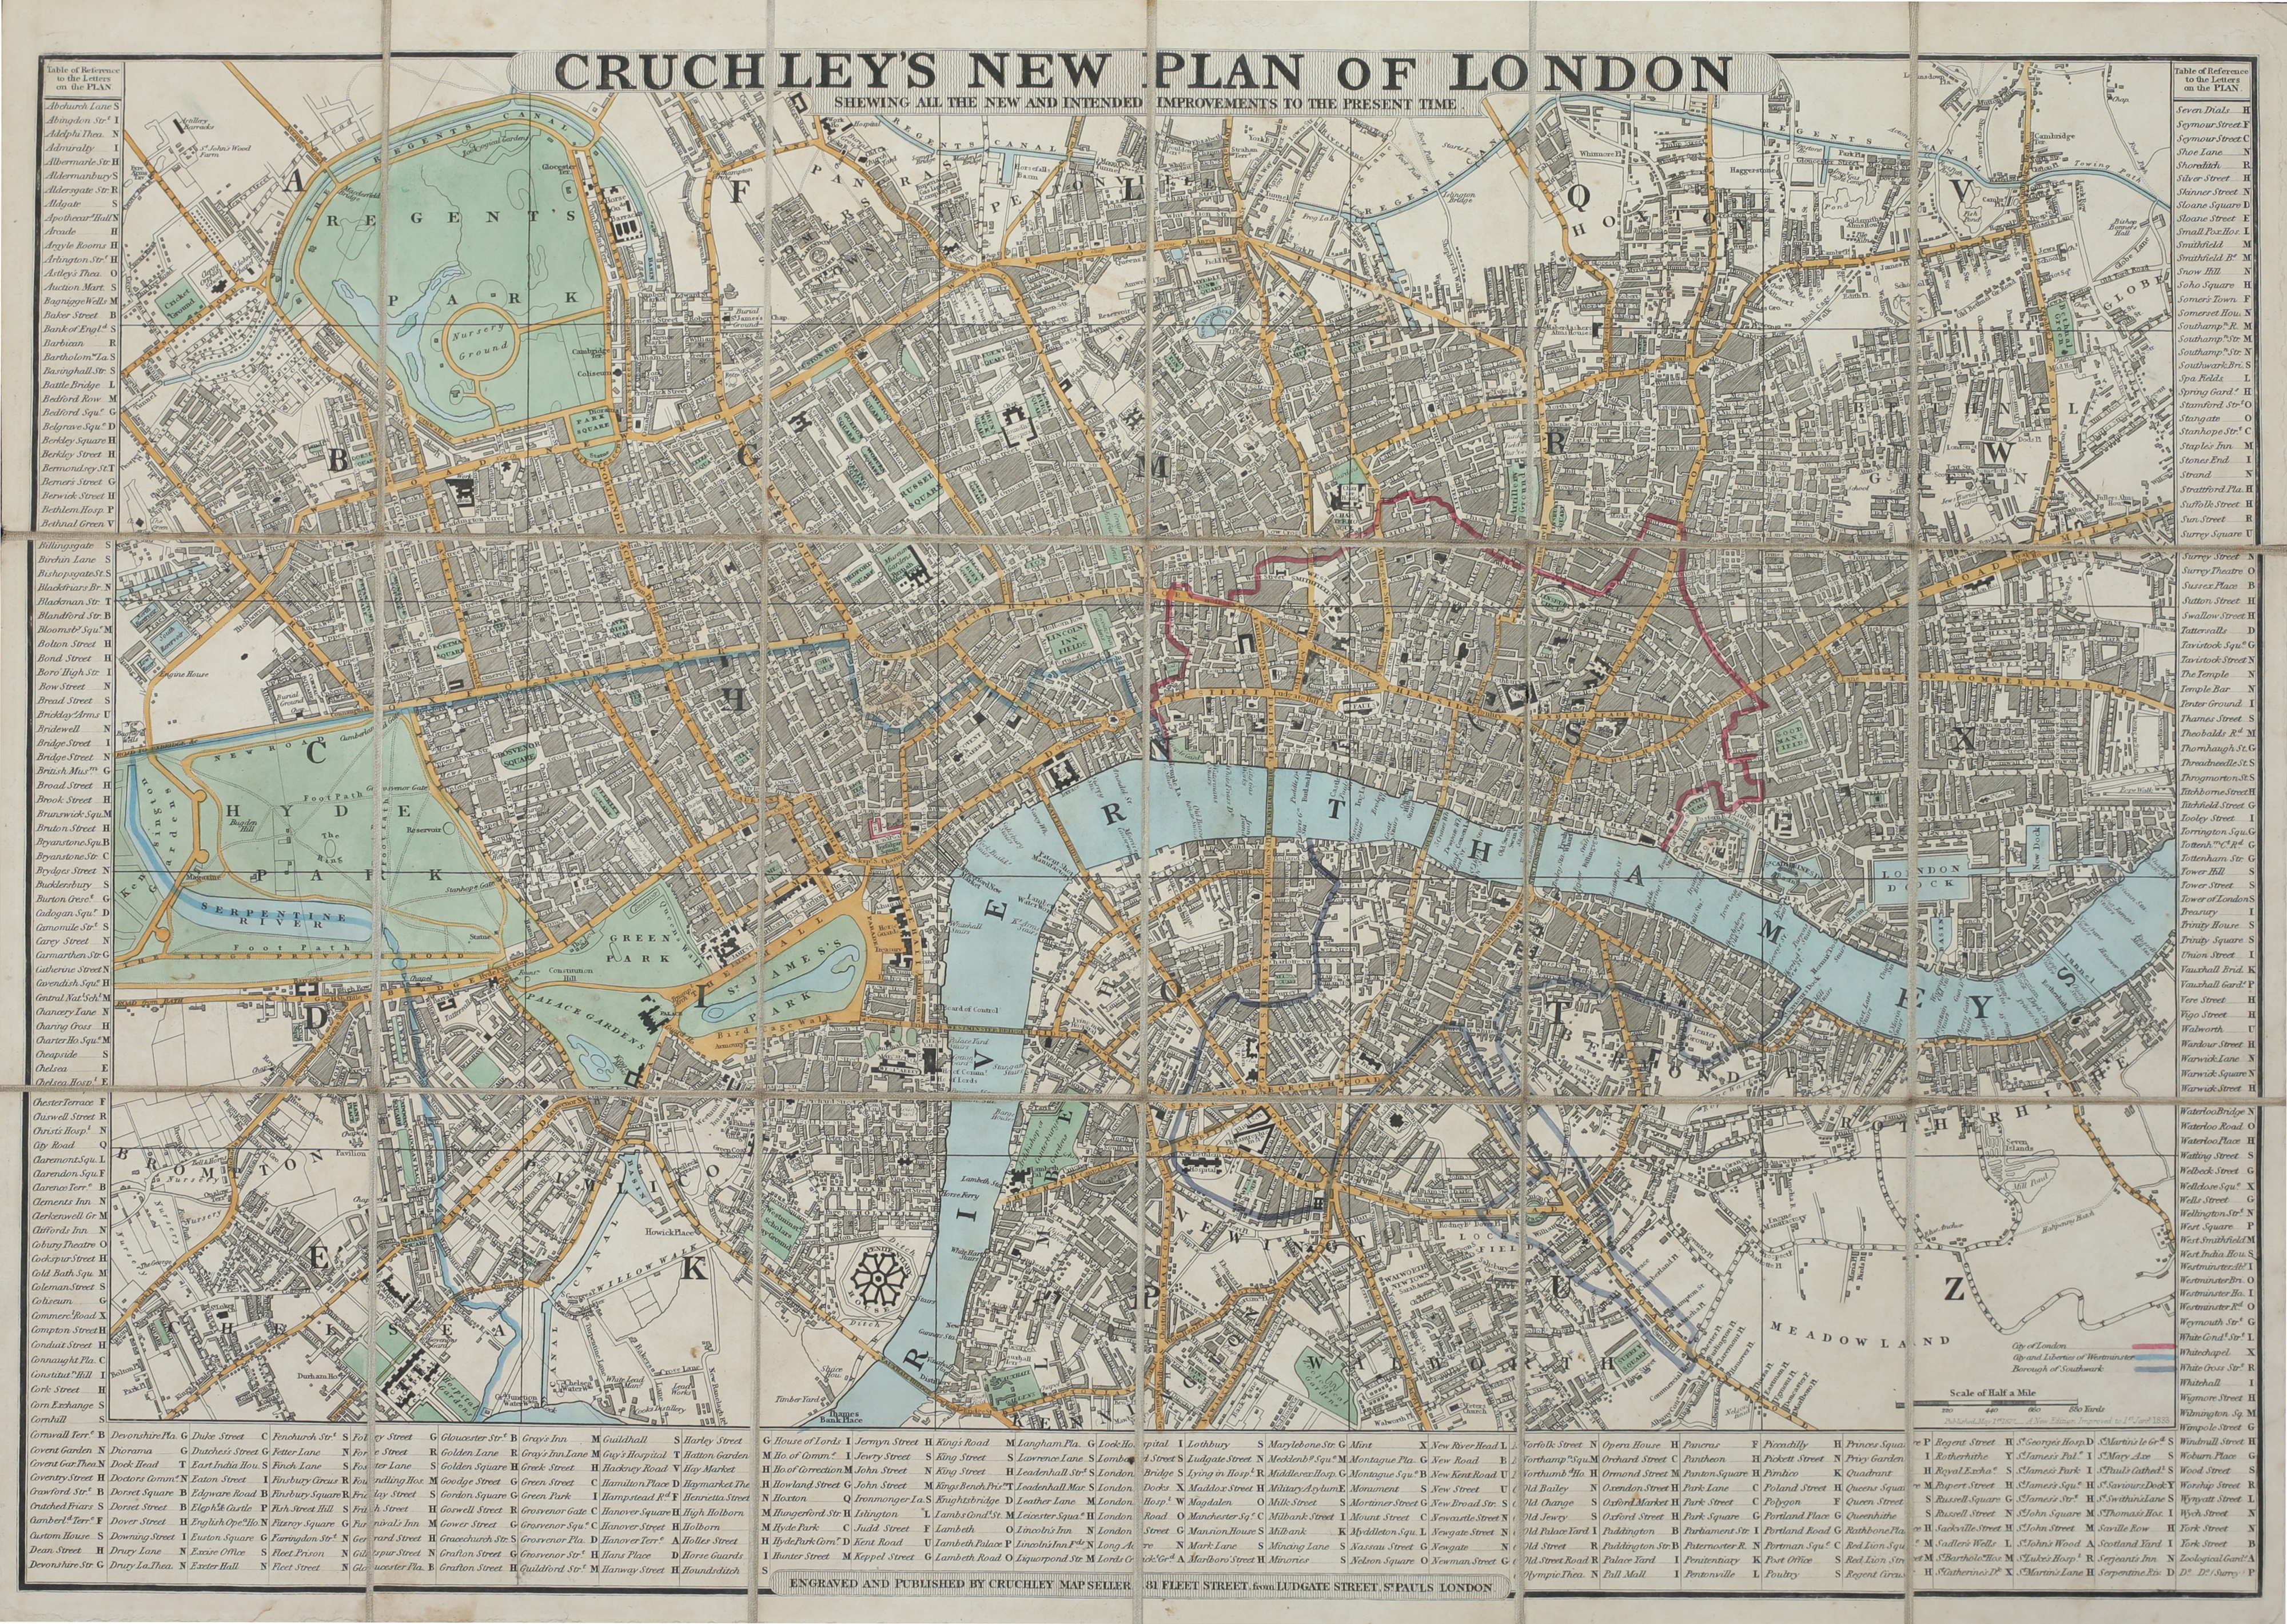 Cruchley's New Plan of London of 1833,